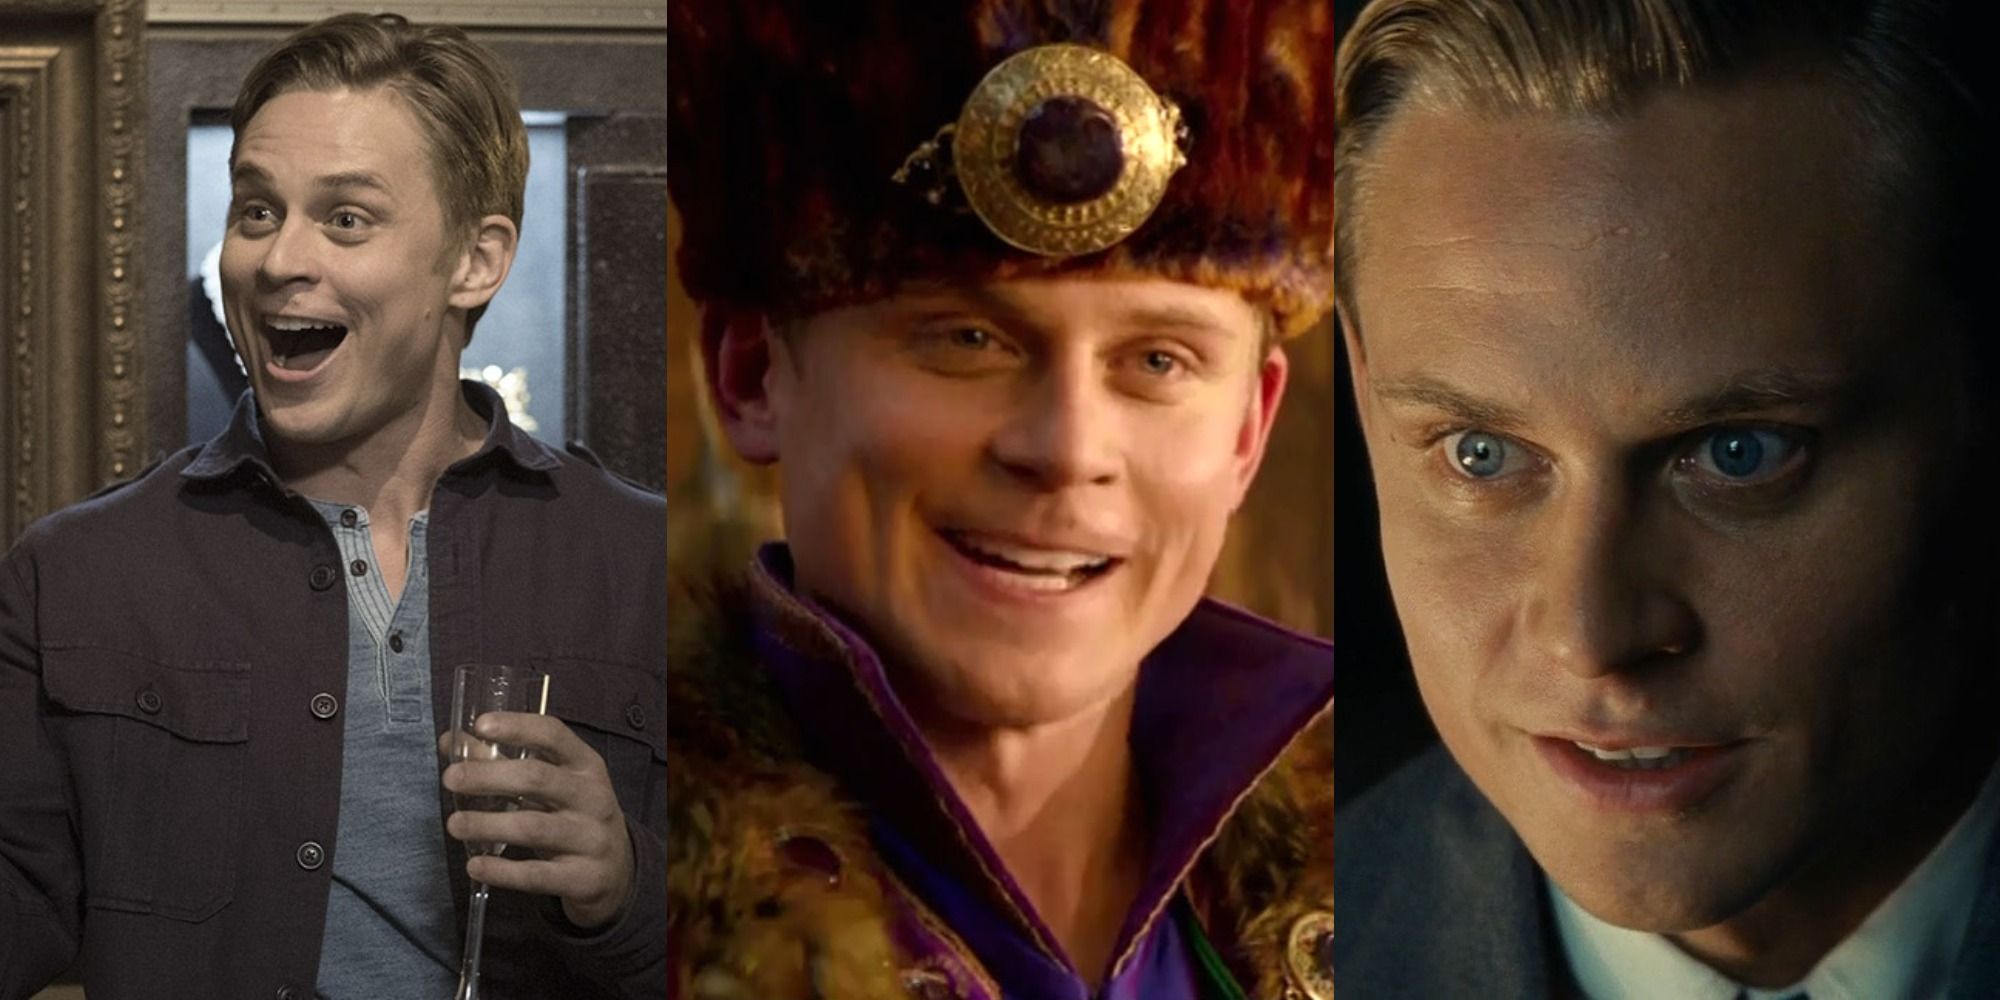 10 Best Billy Magnussen Movie And Television Roles, According To IMDb